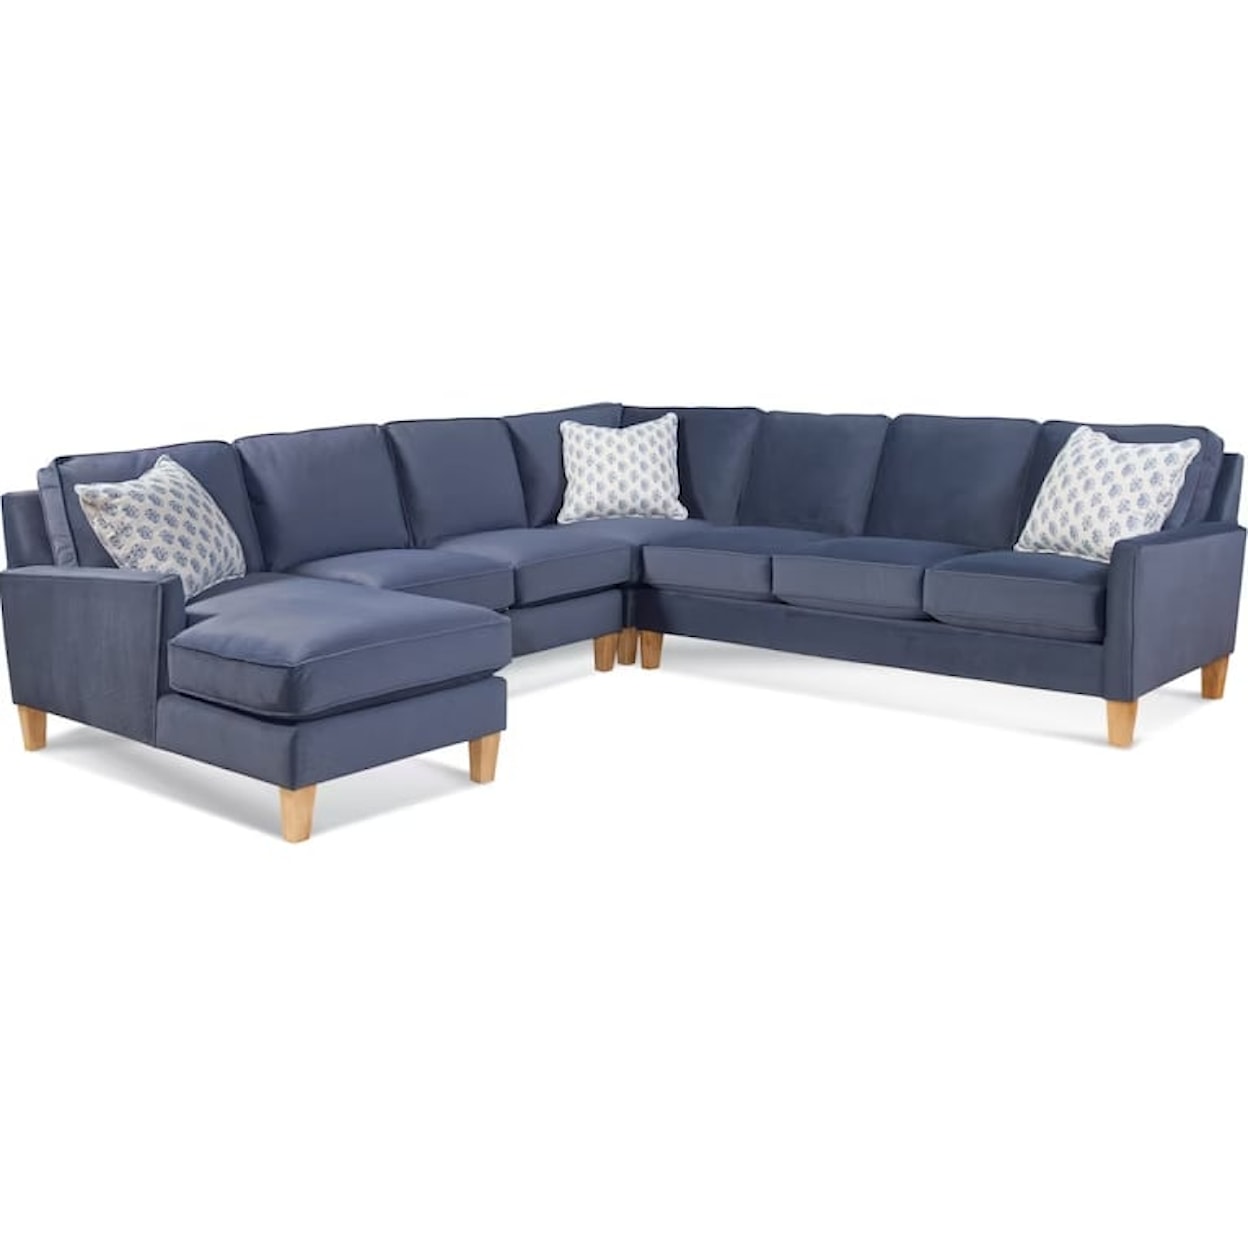 Braxton Culler Urban Options Chaise Sectional